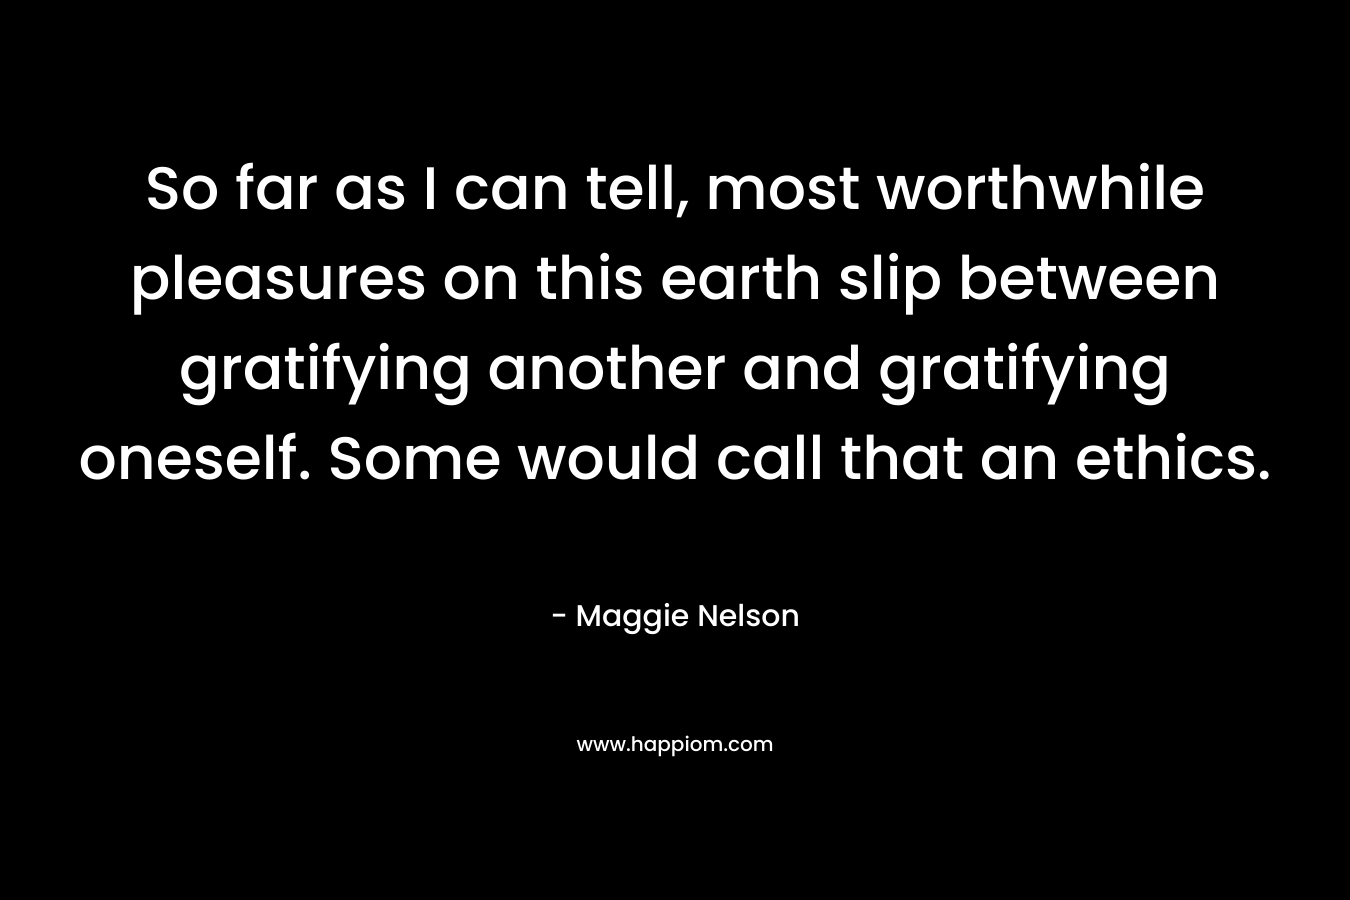 So far as I can tell, most worthwhile pleasures on this earth slip between gratifying another and gratifying oneself. Some would call that an ethics. – Maggie Nelson